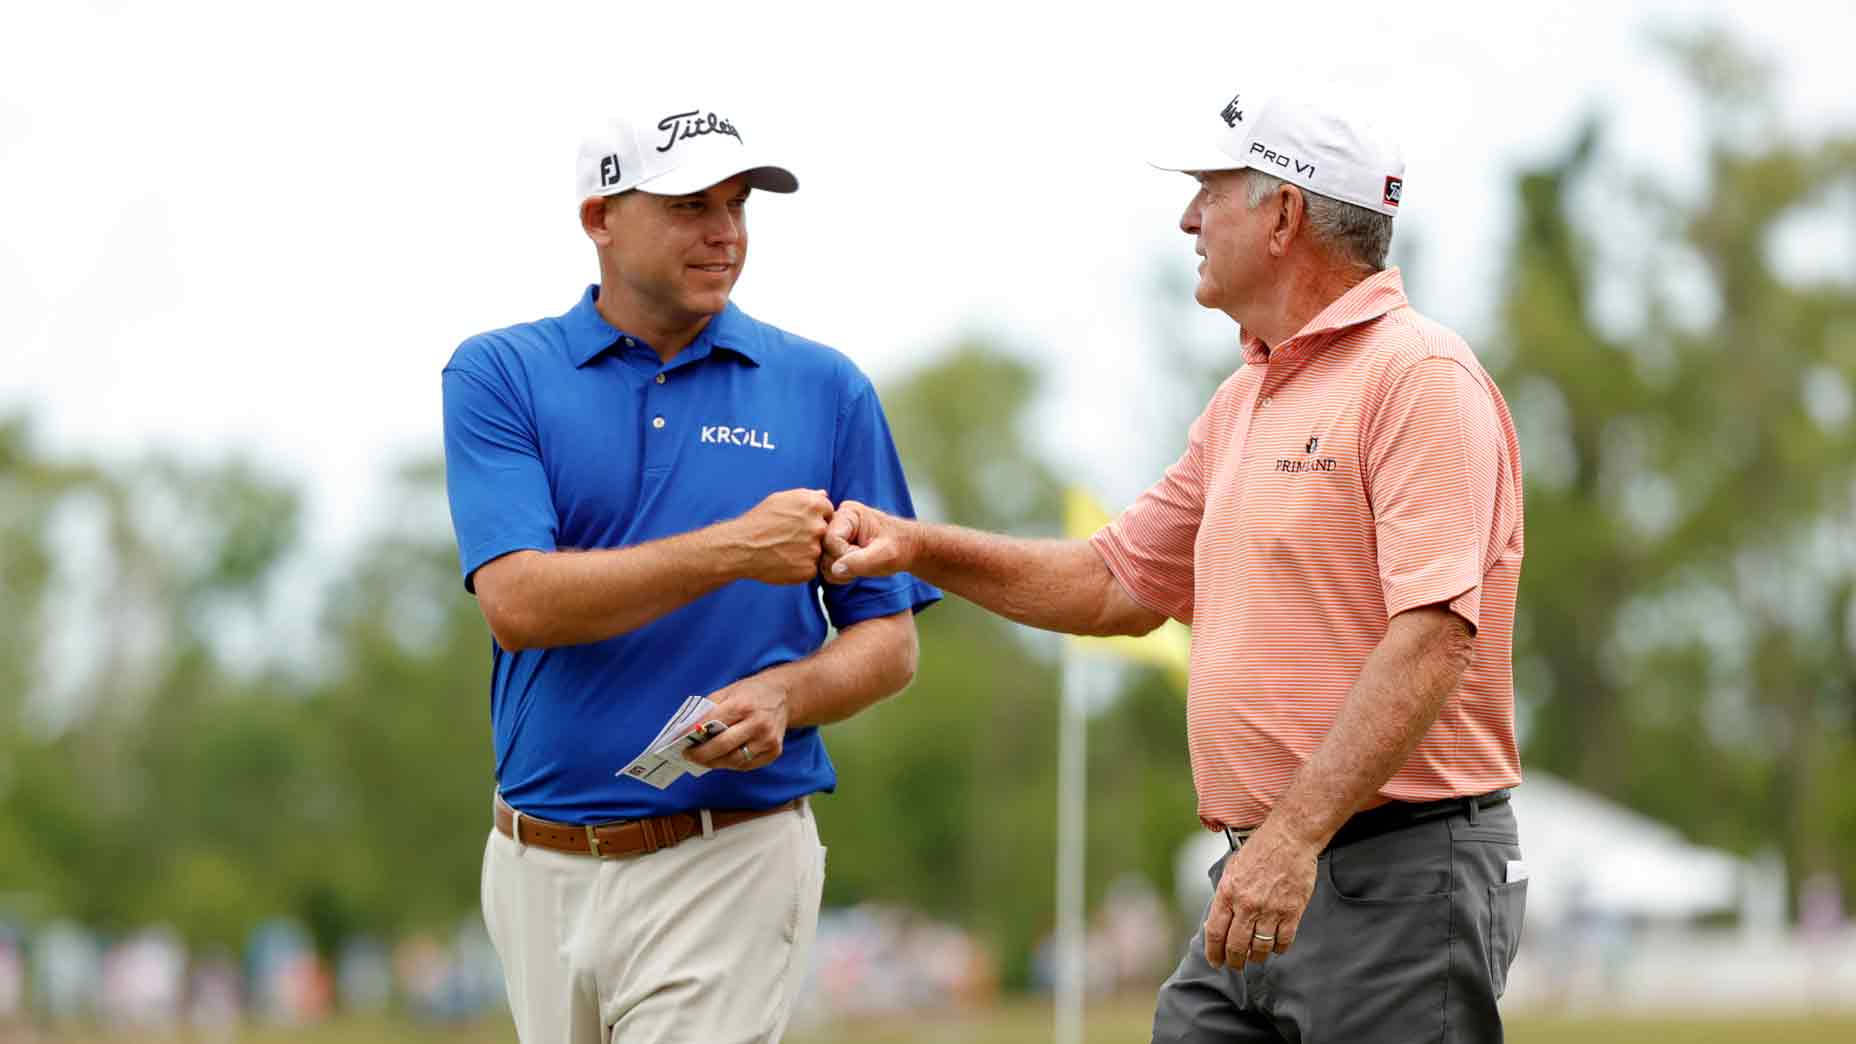 Golf Legends, Jay Haas and Son, Bill, Commemorate Victory with Fist Bump Wallpaper